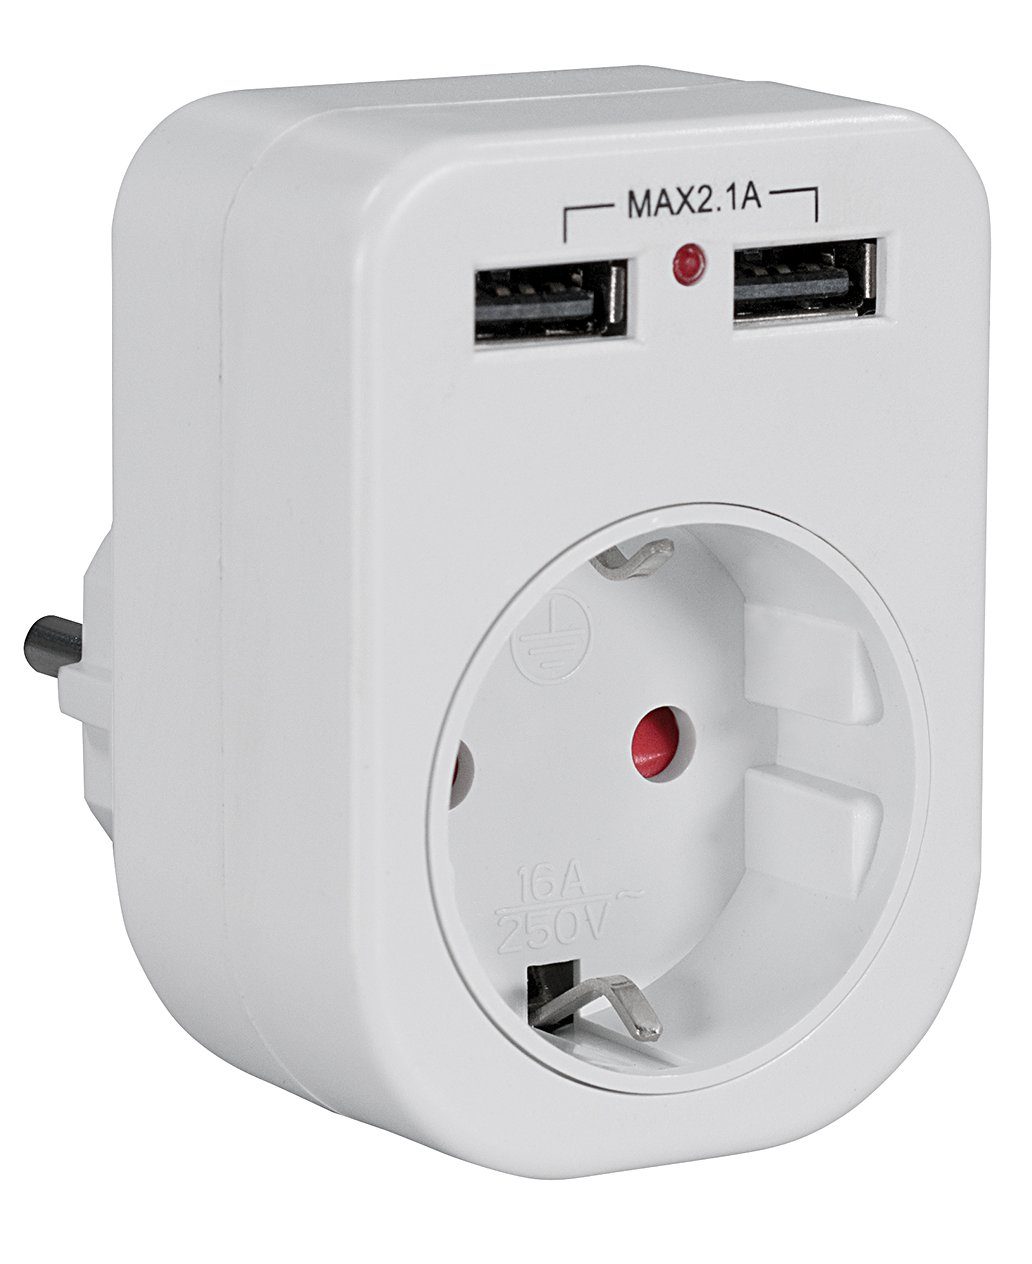 Maxtrack USB 2,1A Ladeadapter Mehrfachsteckdose,